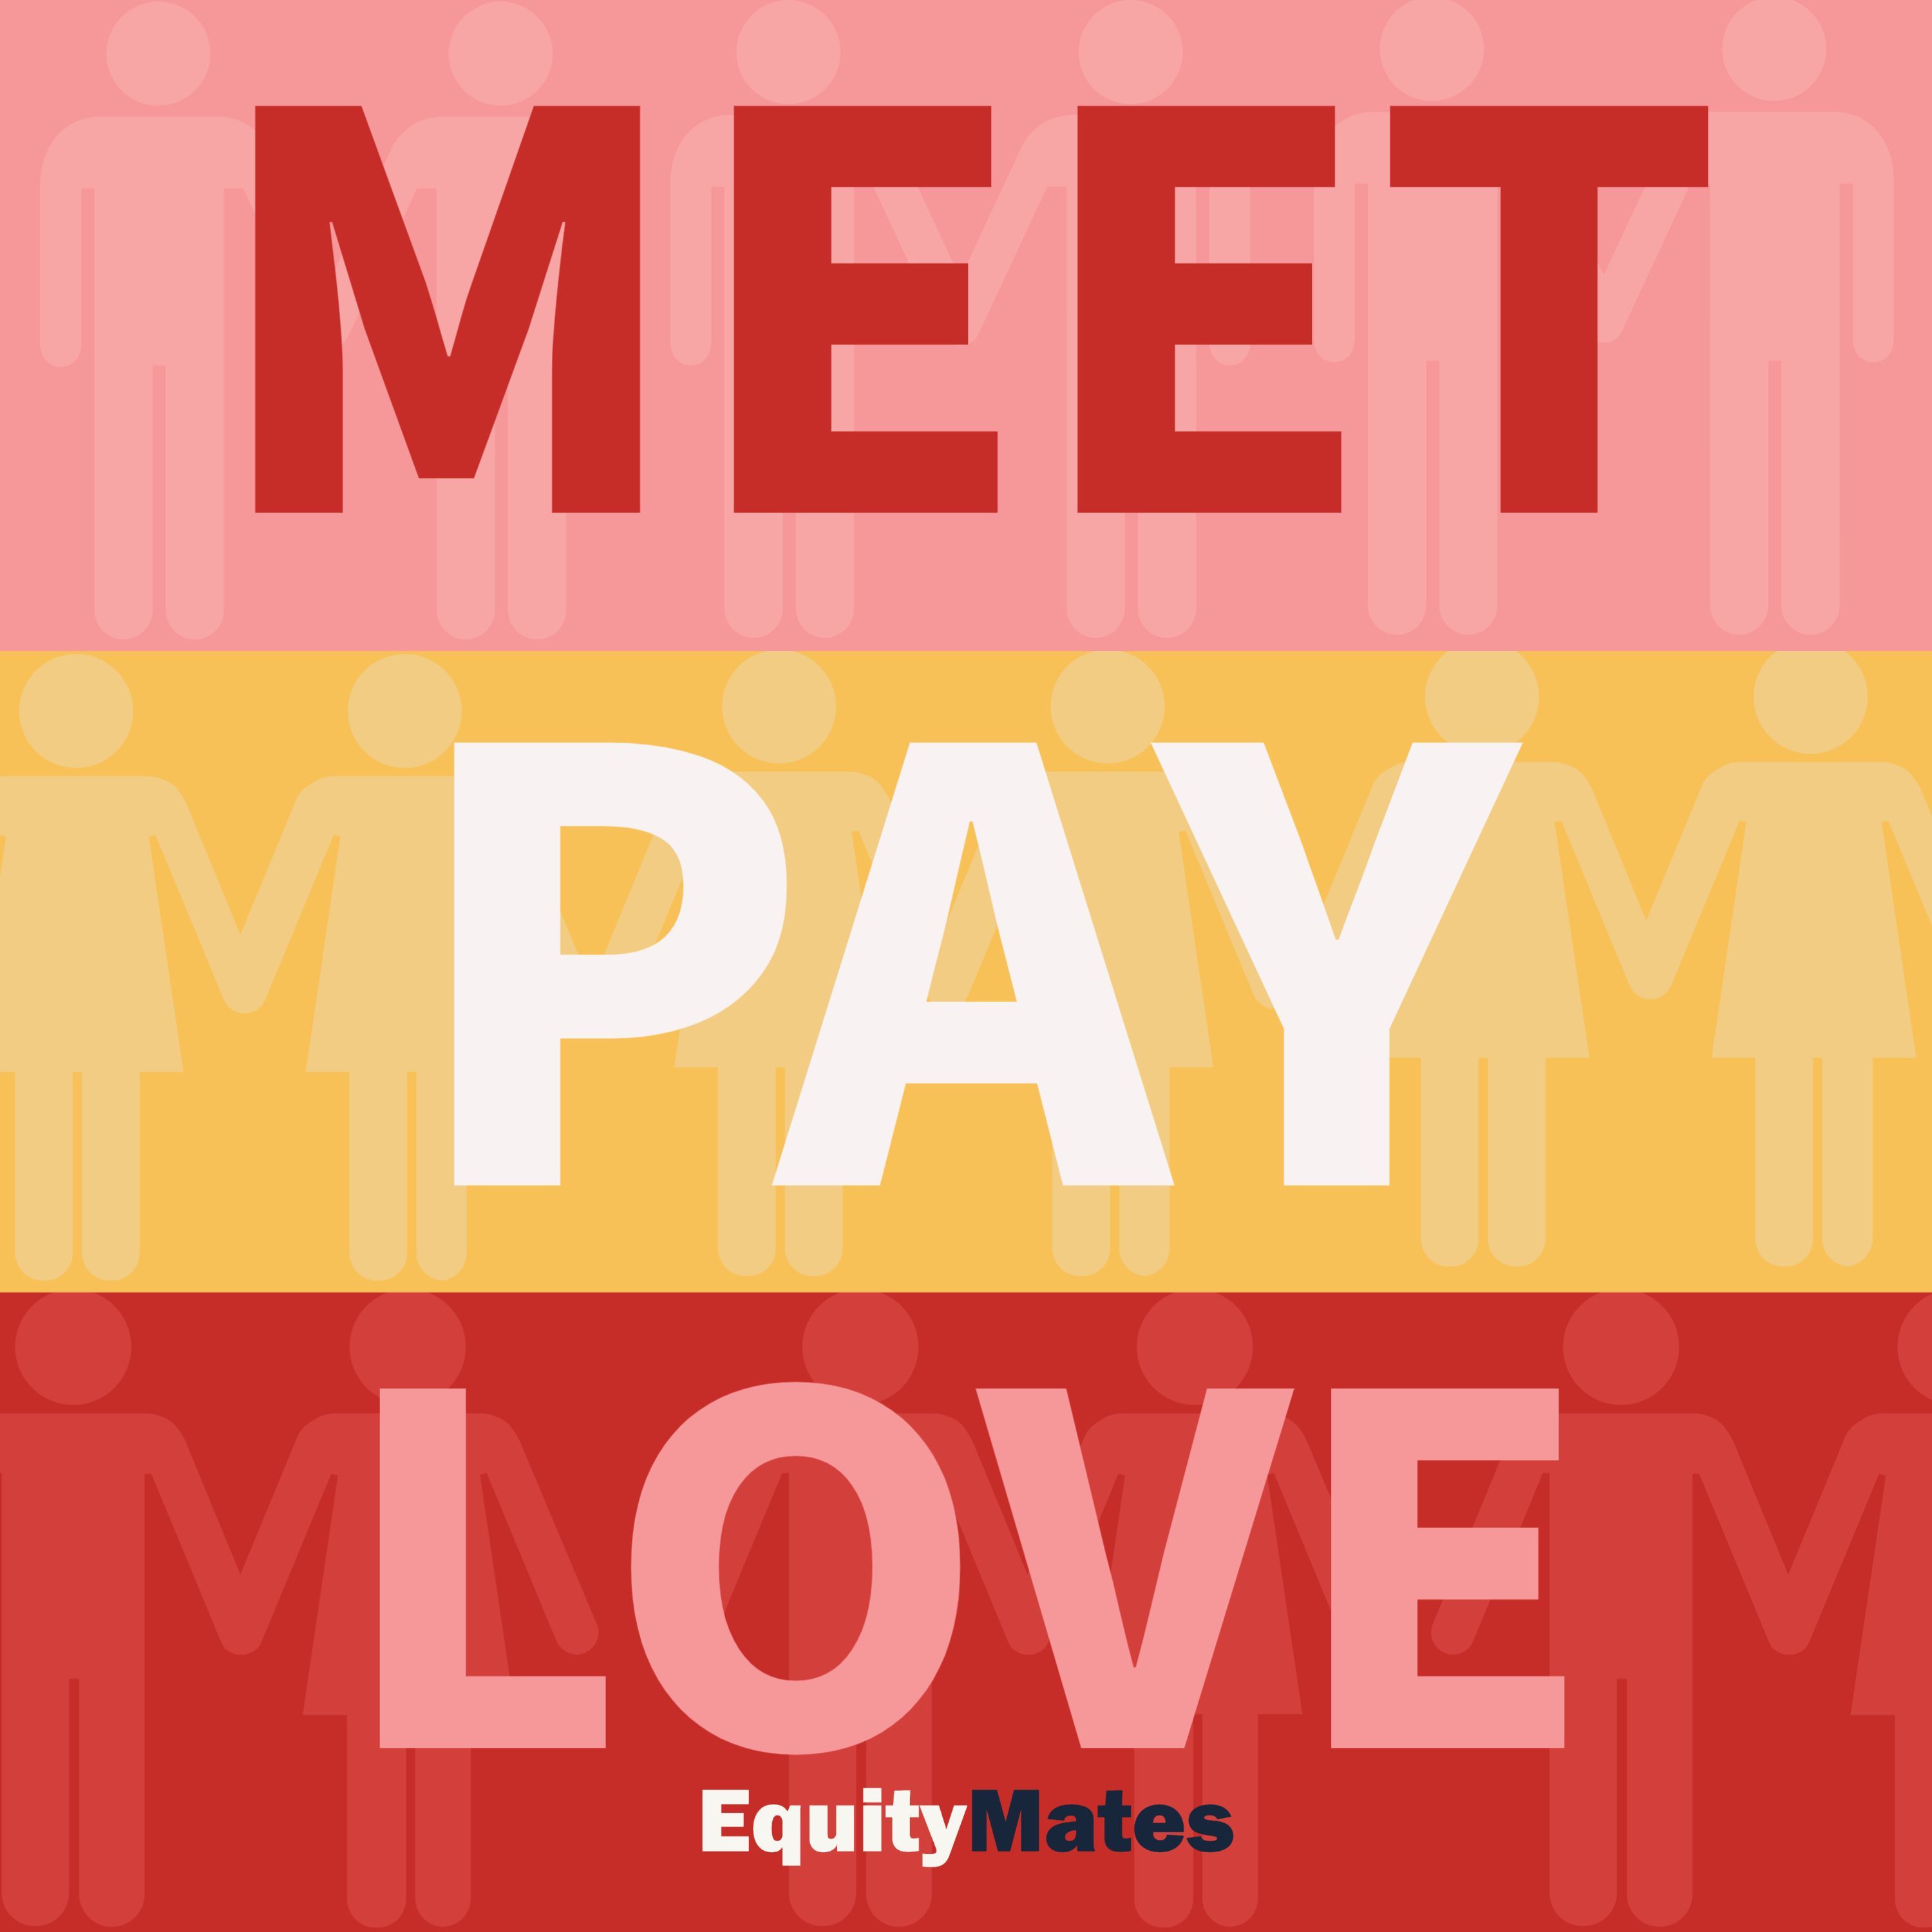 Meet Pay Love - meet the hosts of Equity Mates' newest podcast!